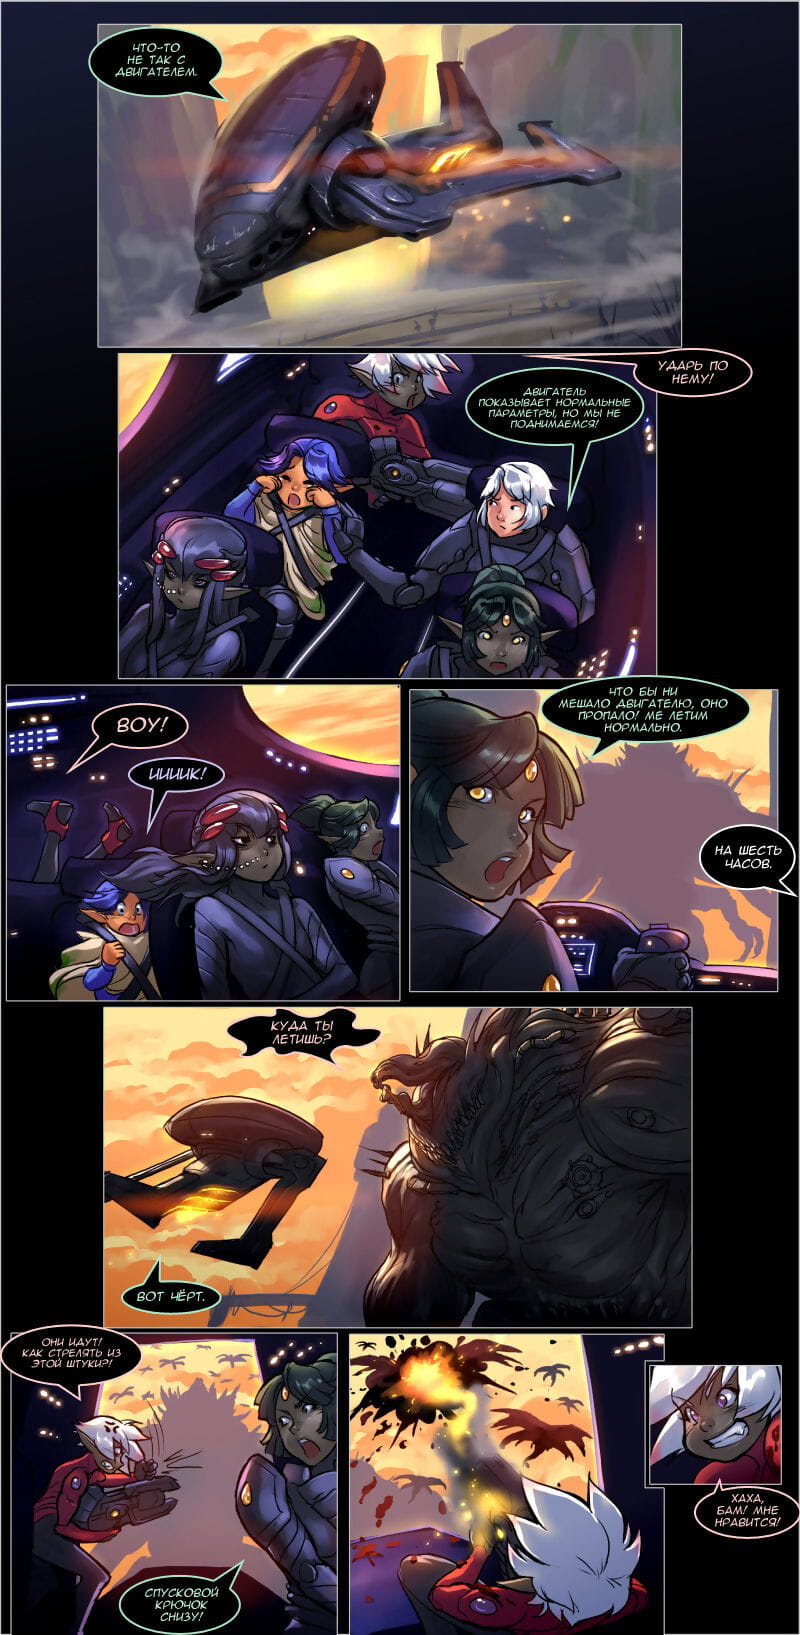 Drowtales: Space Age / ??????? ????: ??????????? ??? Ch.4 - part 3 page 1